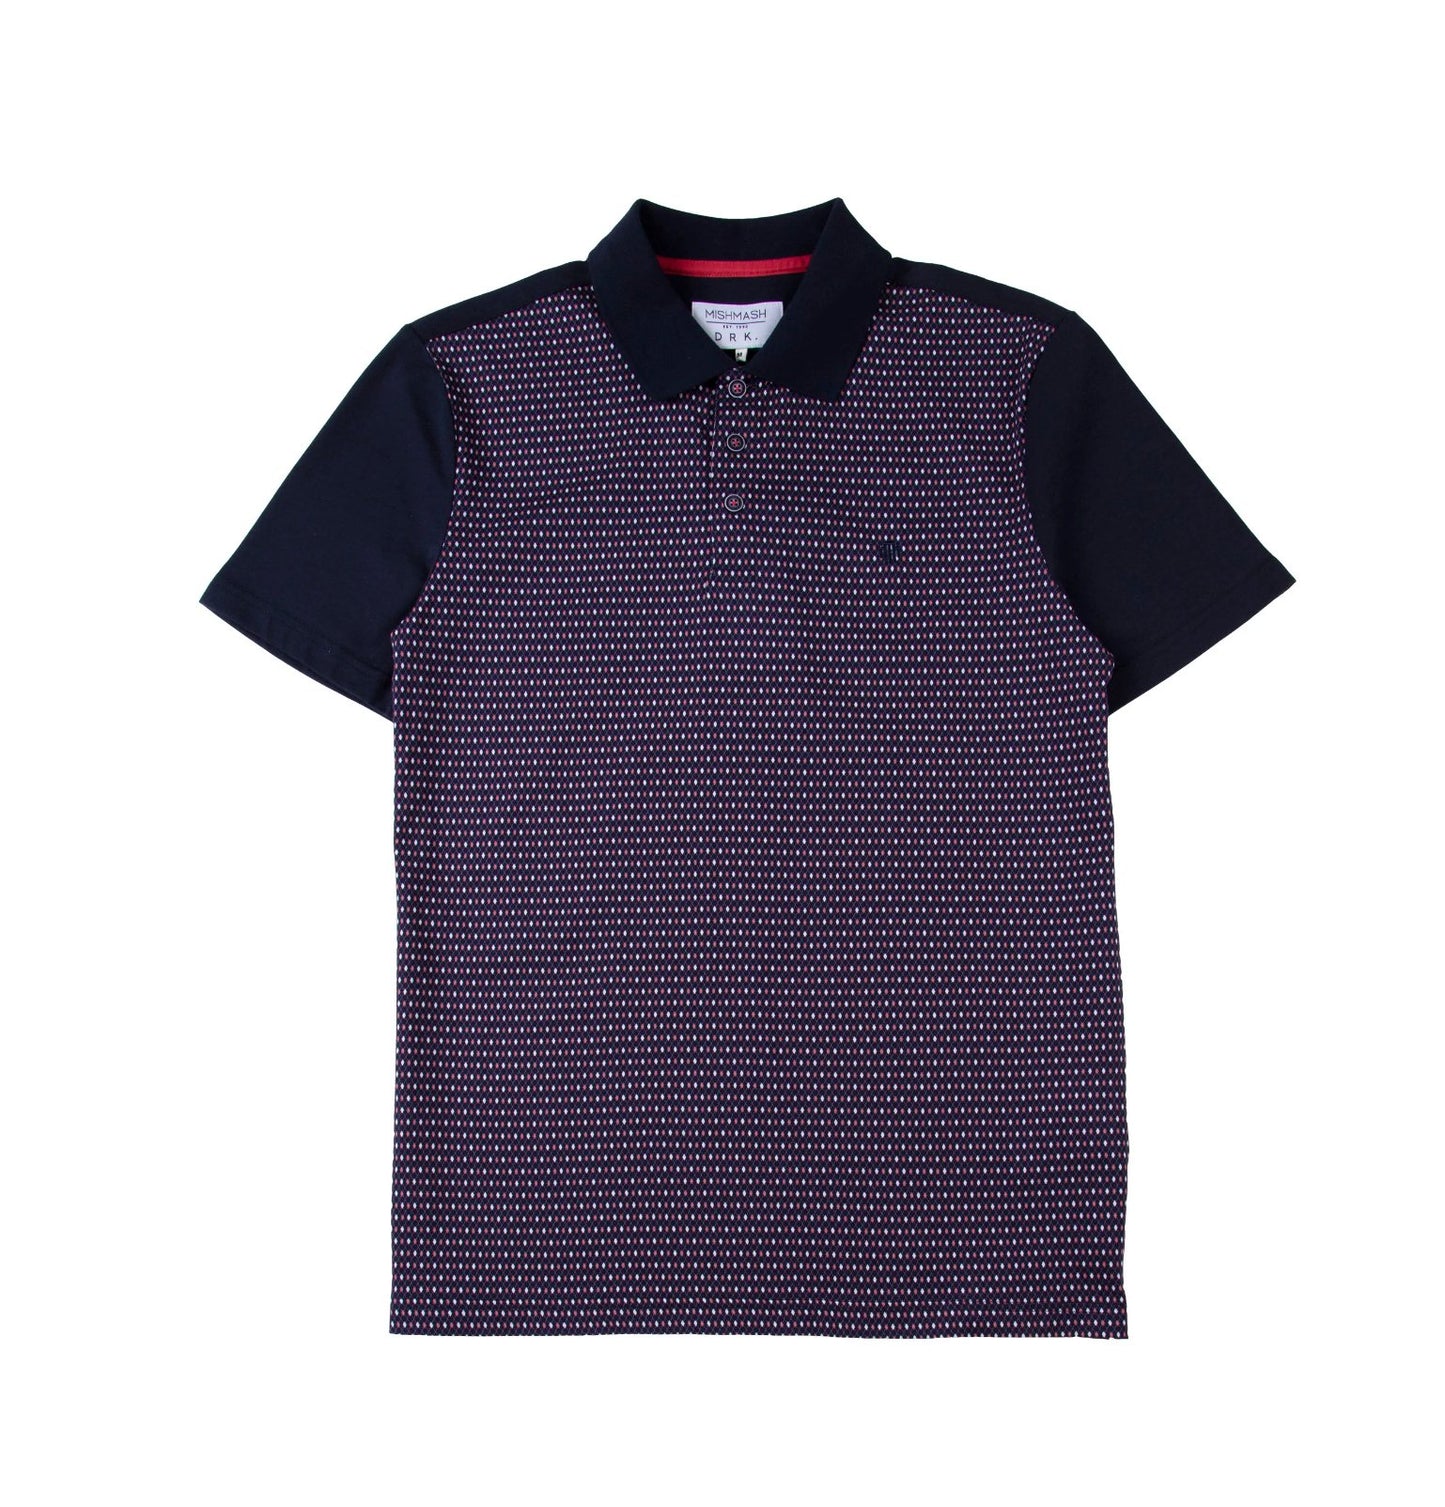 REGULAR FIT NORO NAVY PRINTED JERSEY POLO - GLS Clothing